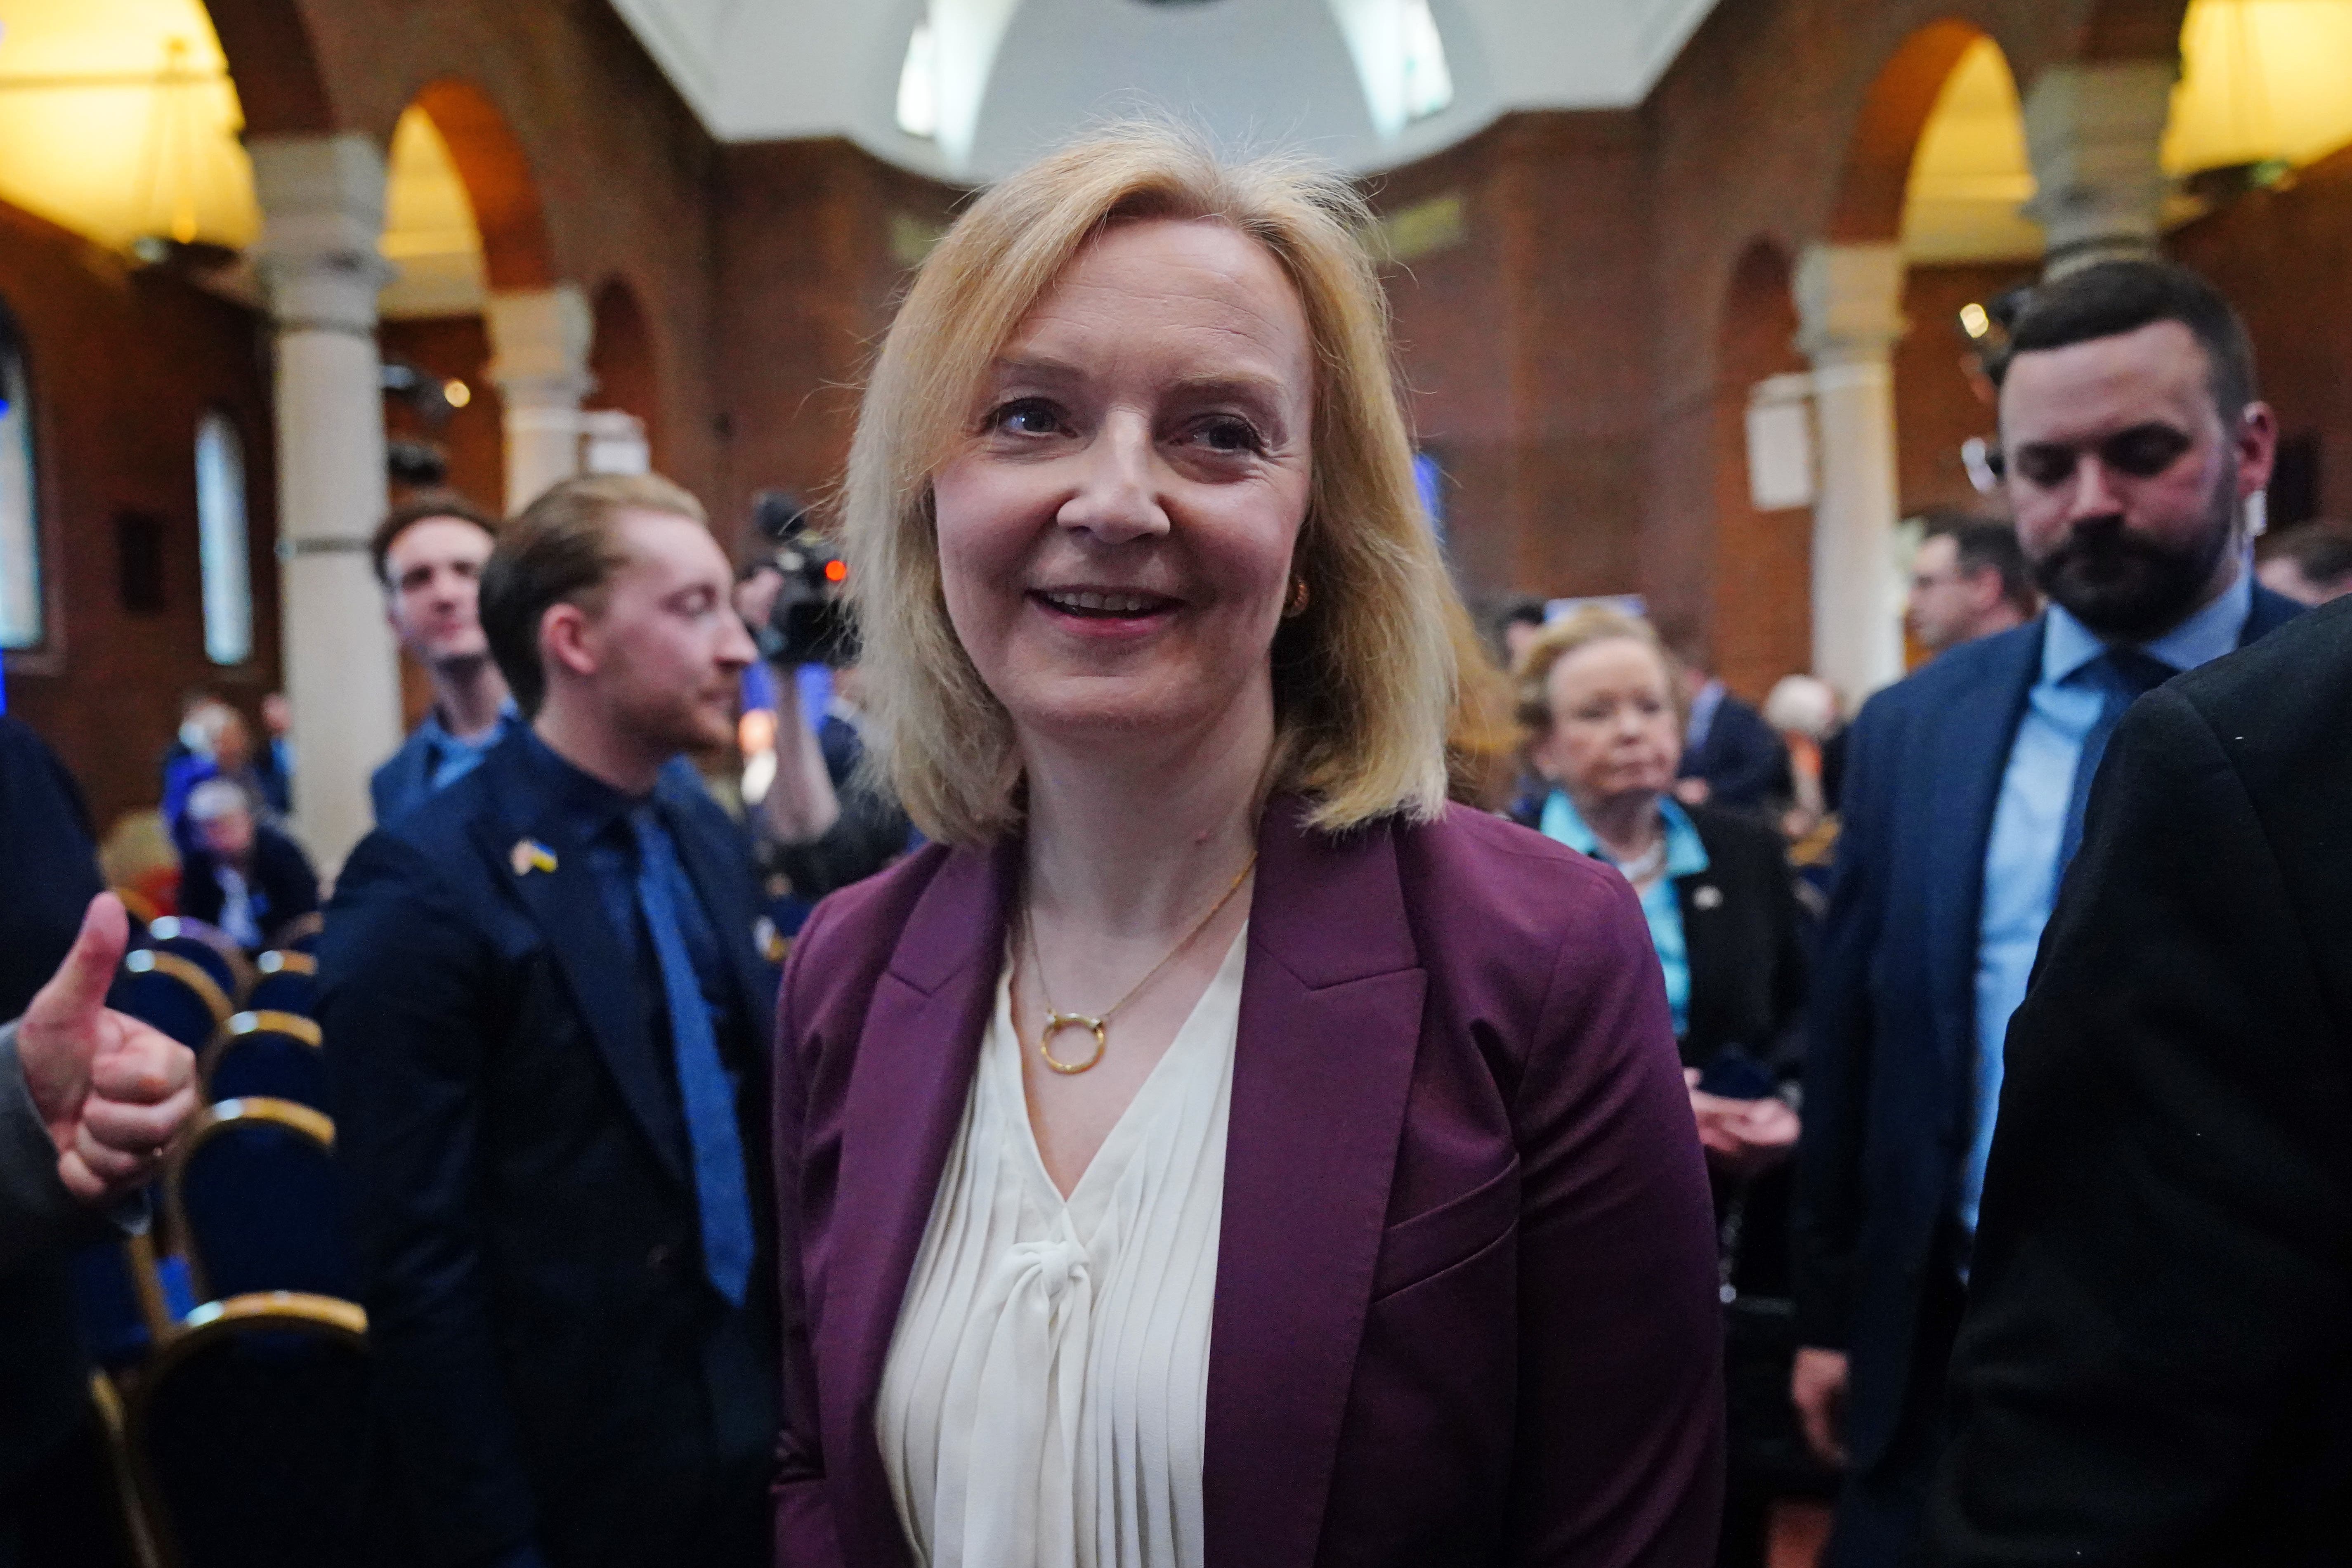 Liz Truss has proposed a law that would define sex as ‘biological’ and bar transgender women from female-only spaces (Victoria Jones/PA)